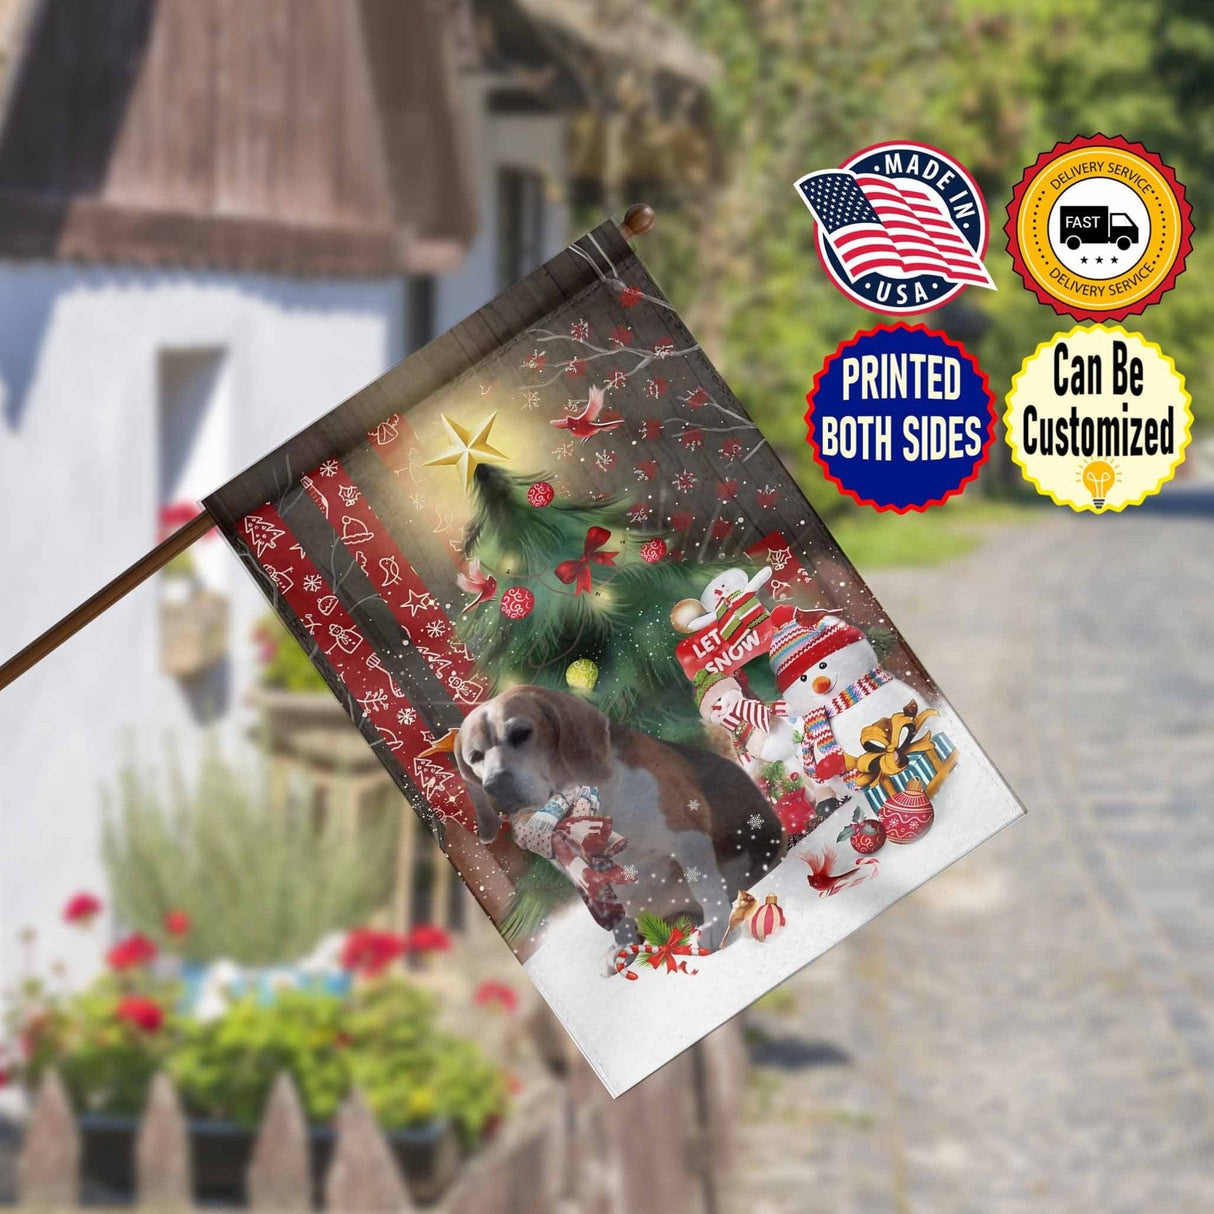 Yard Signs & Flags Dog Lovers - Personalized Let It Snow- Custom Photo Pet Flag